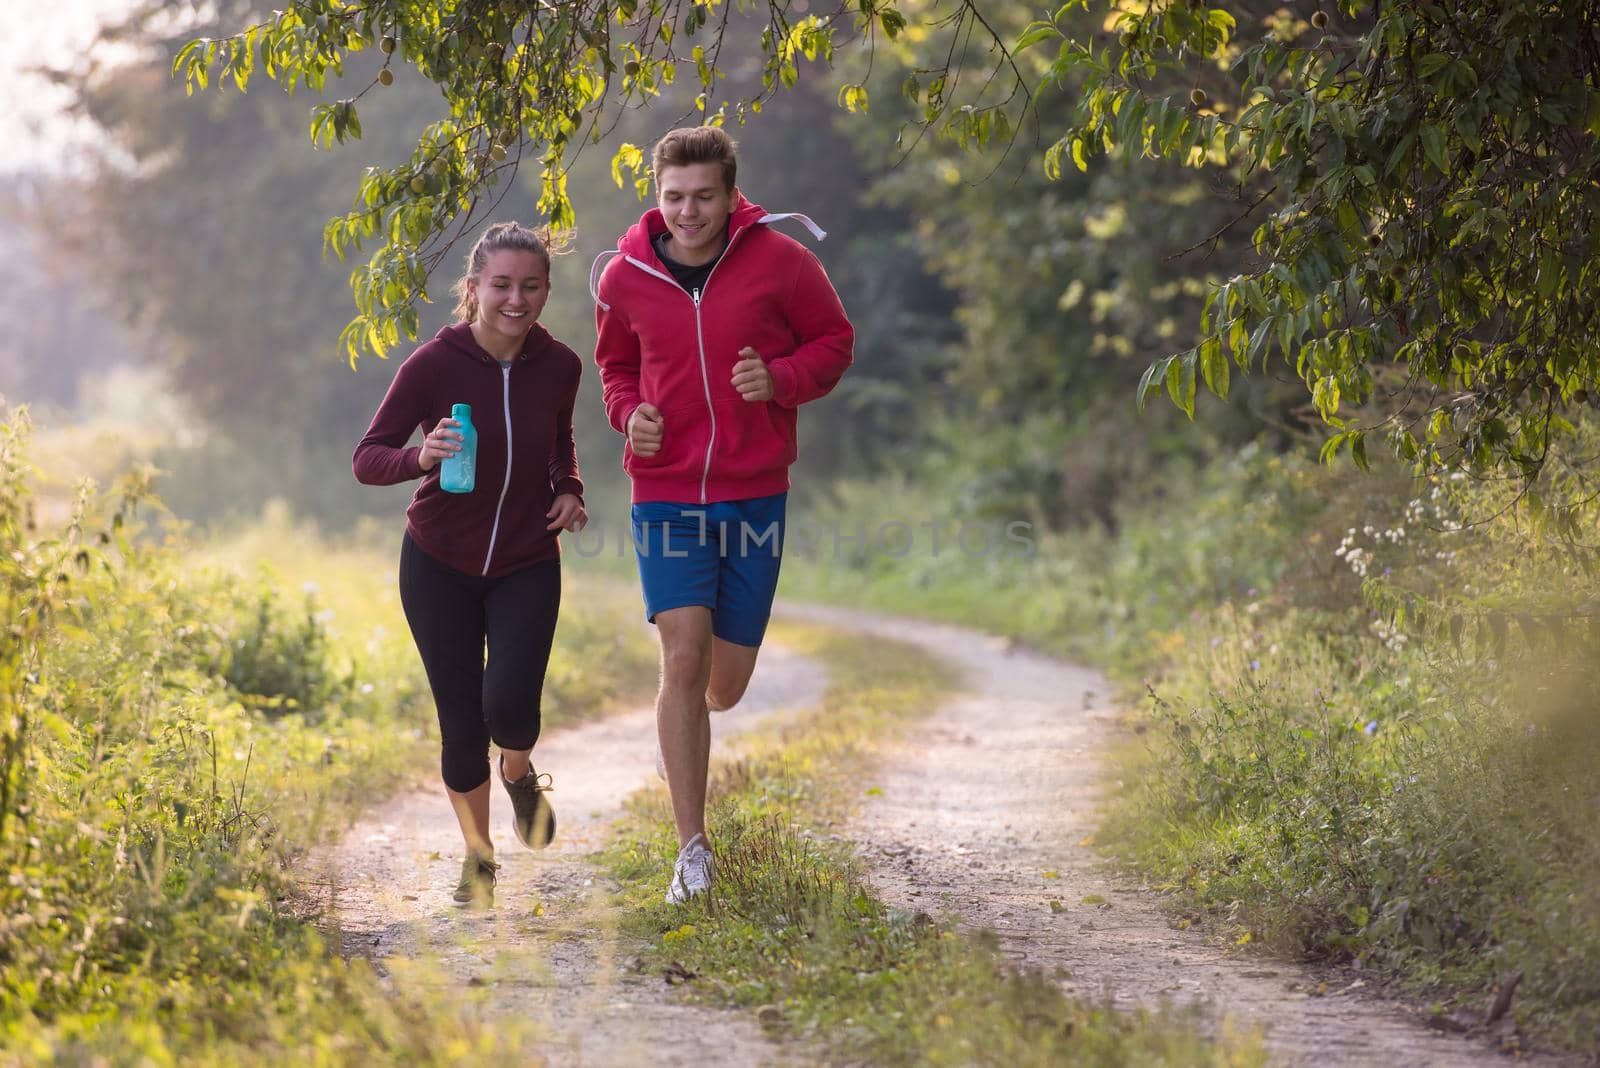 young couple enjoying in a healthy lifestyle while jogging along a country road, exercise and fitness concept